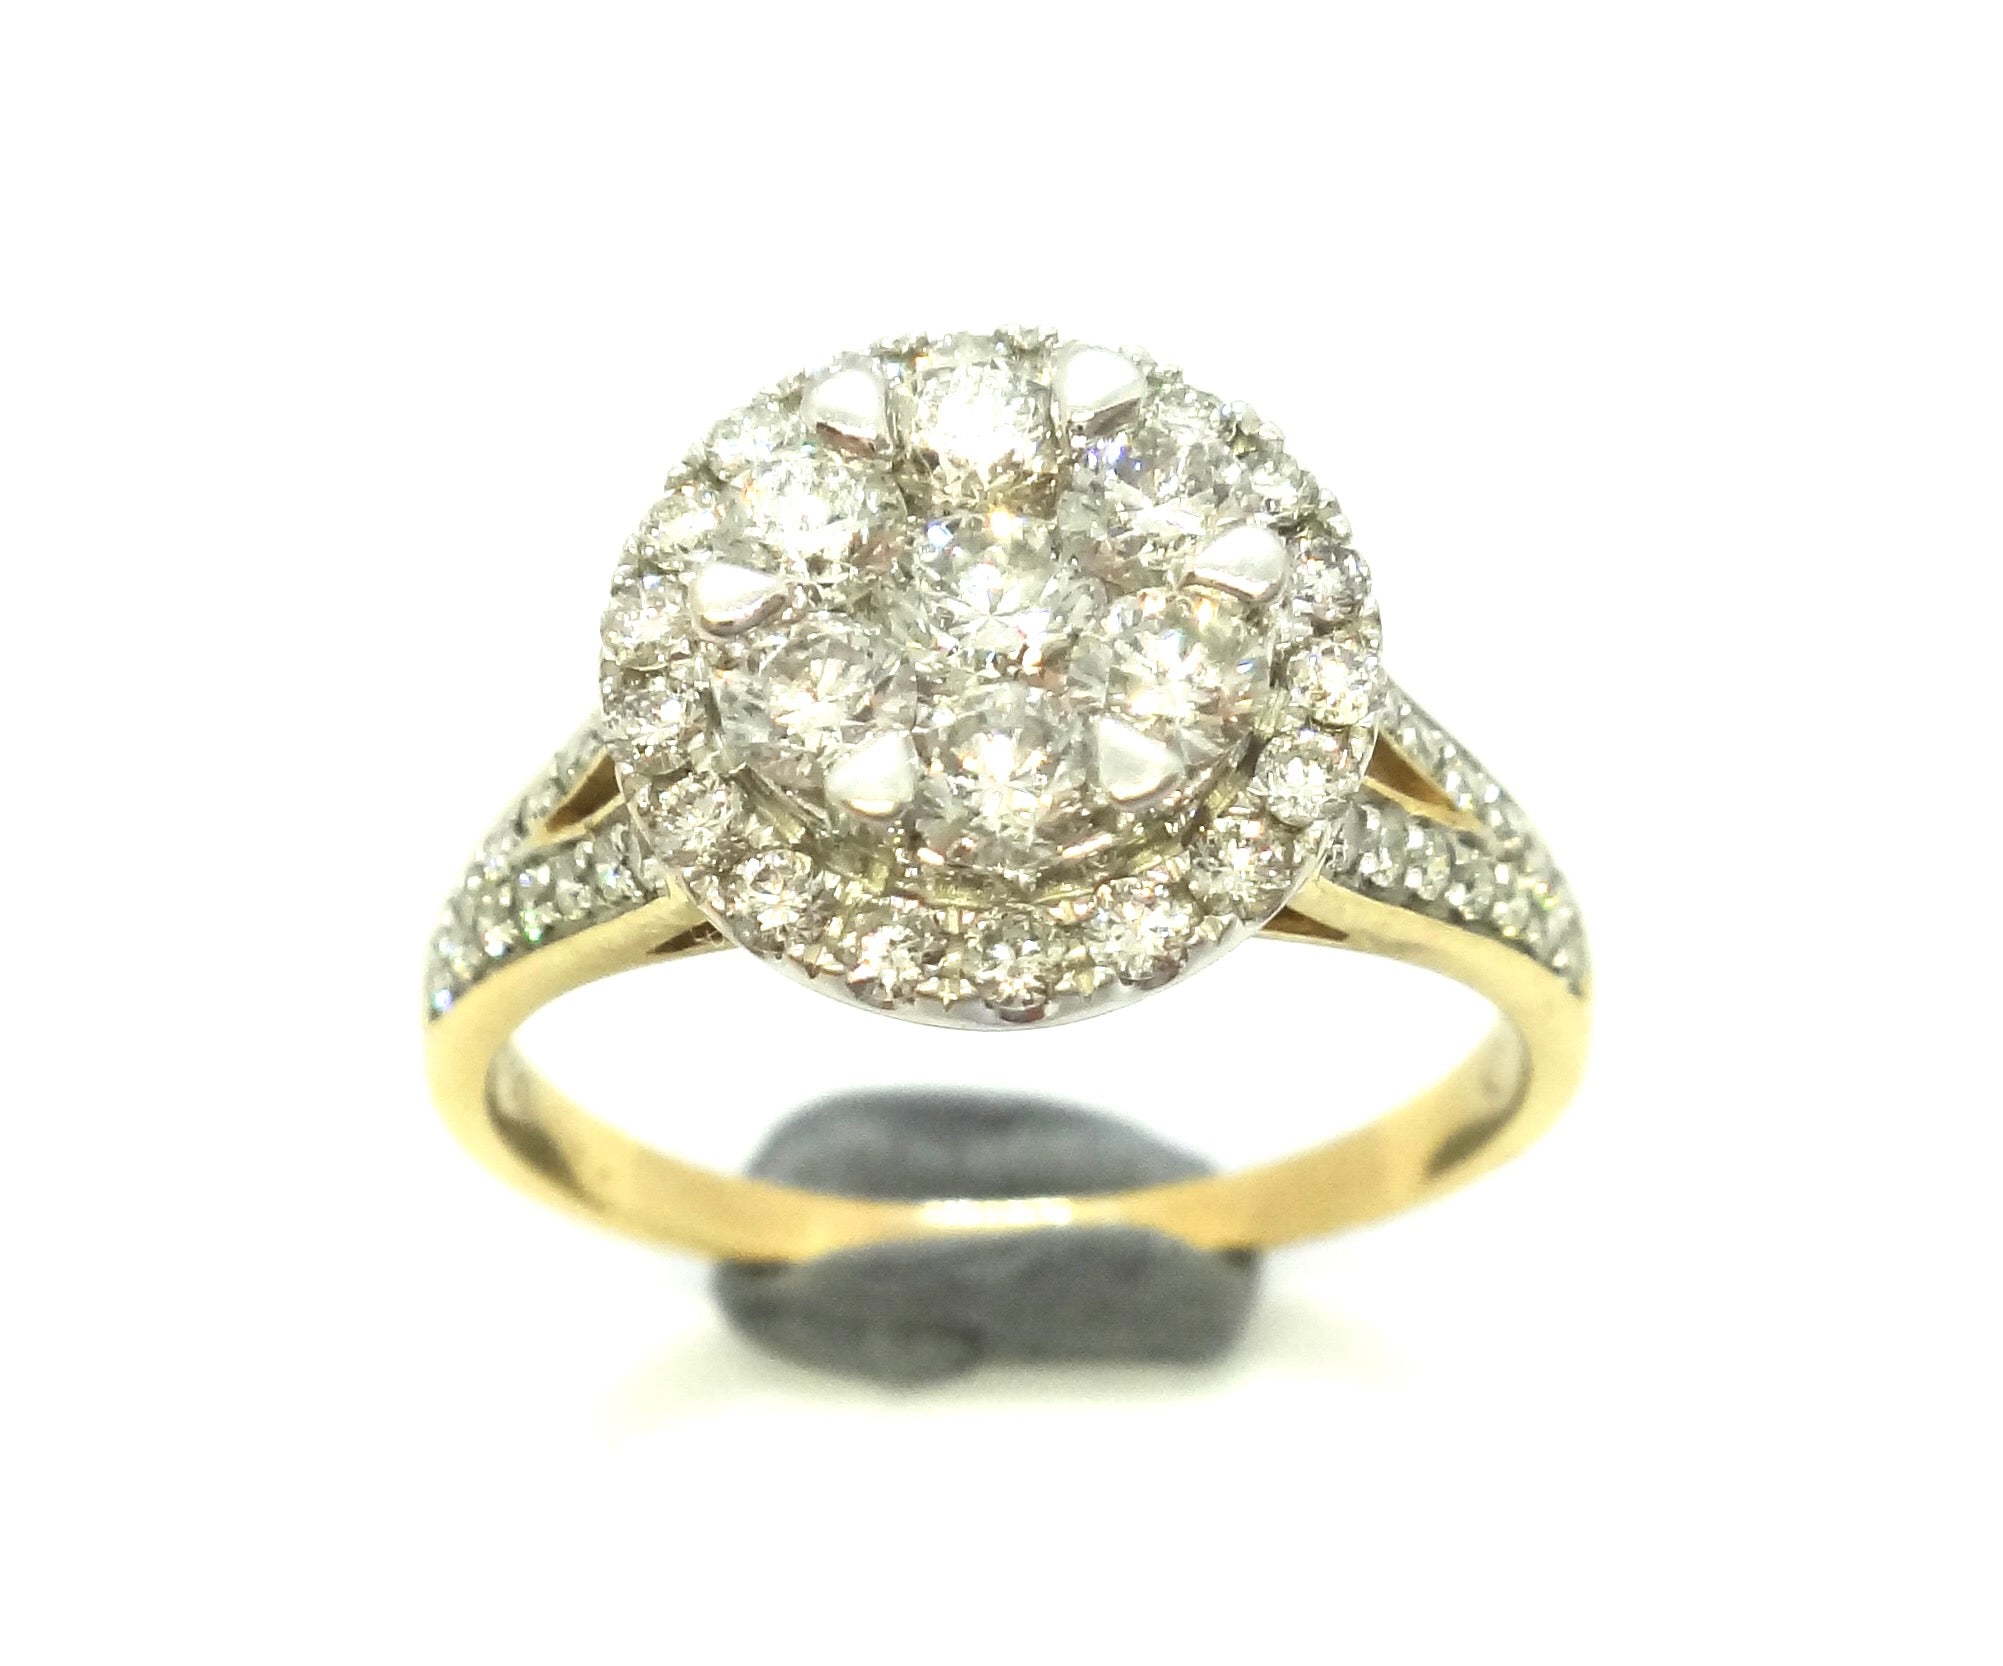 18ct Yellow GOLD & Multi Diamond Cluster Ring, VAL $4,850